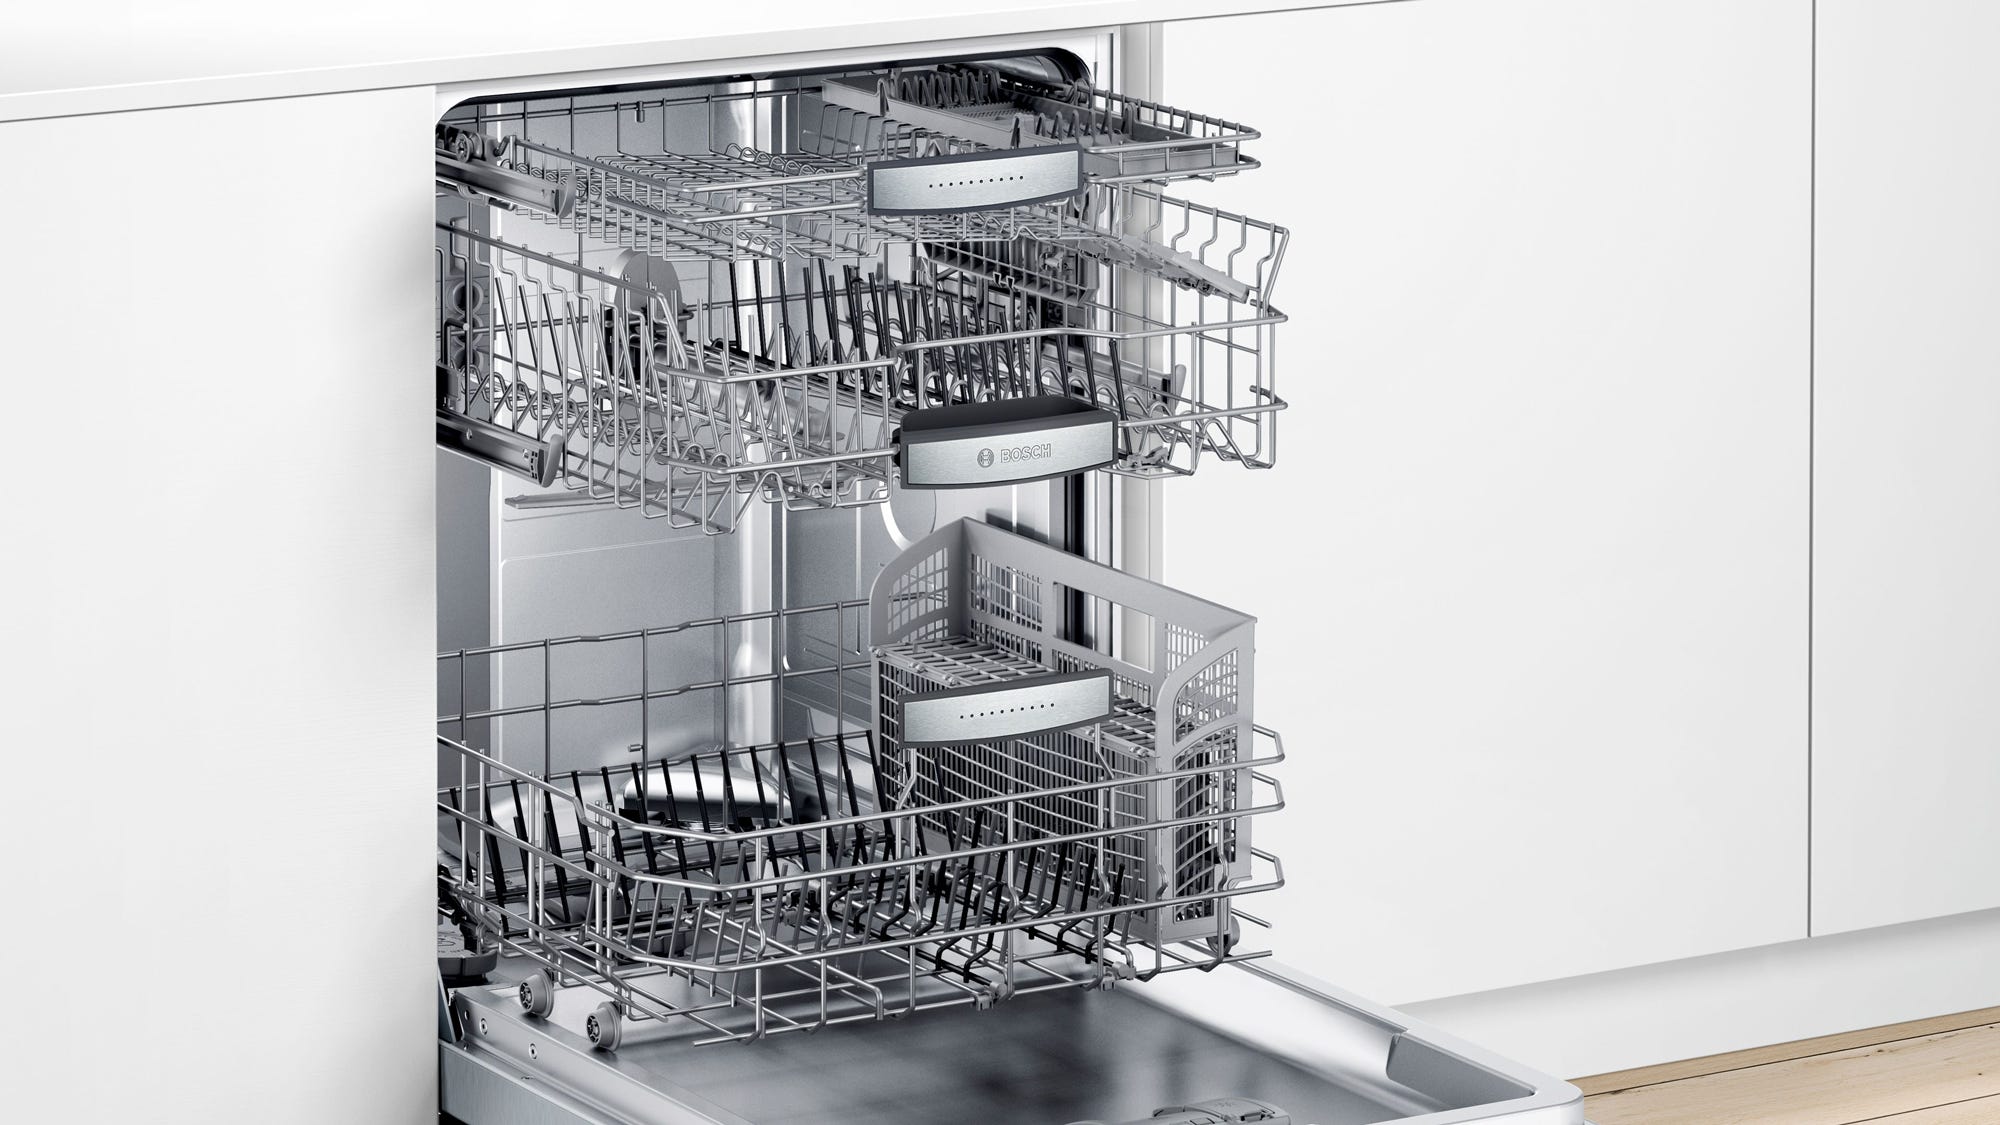 belling dishwasher review